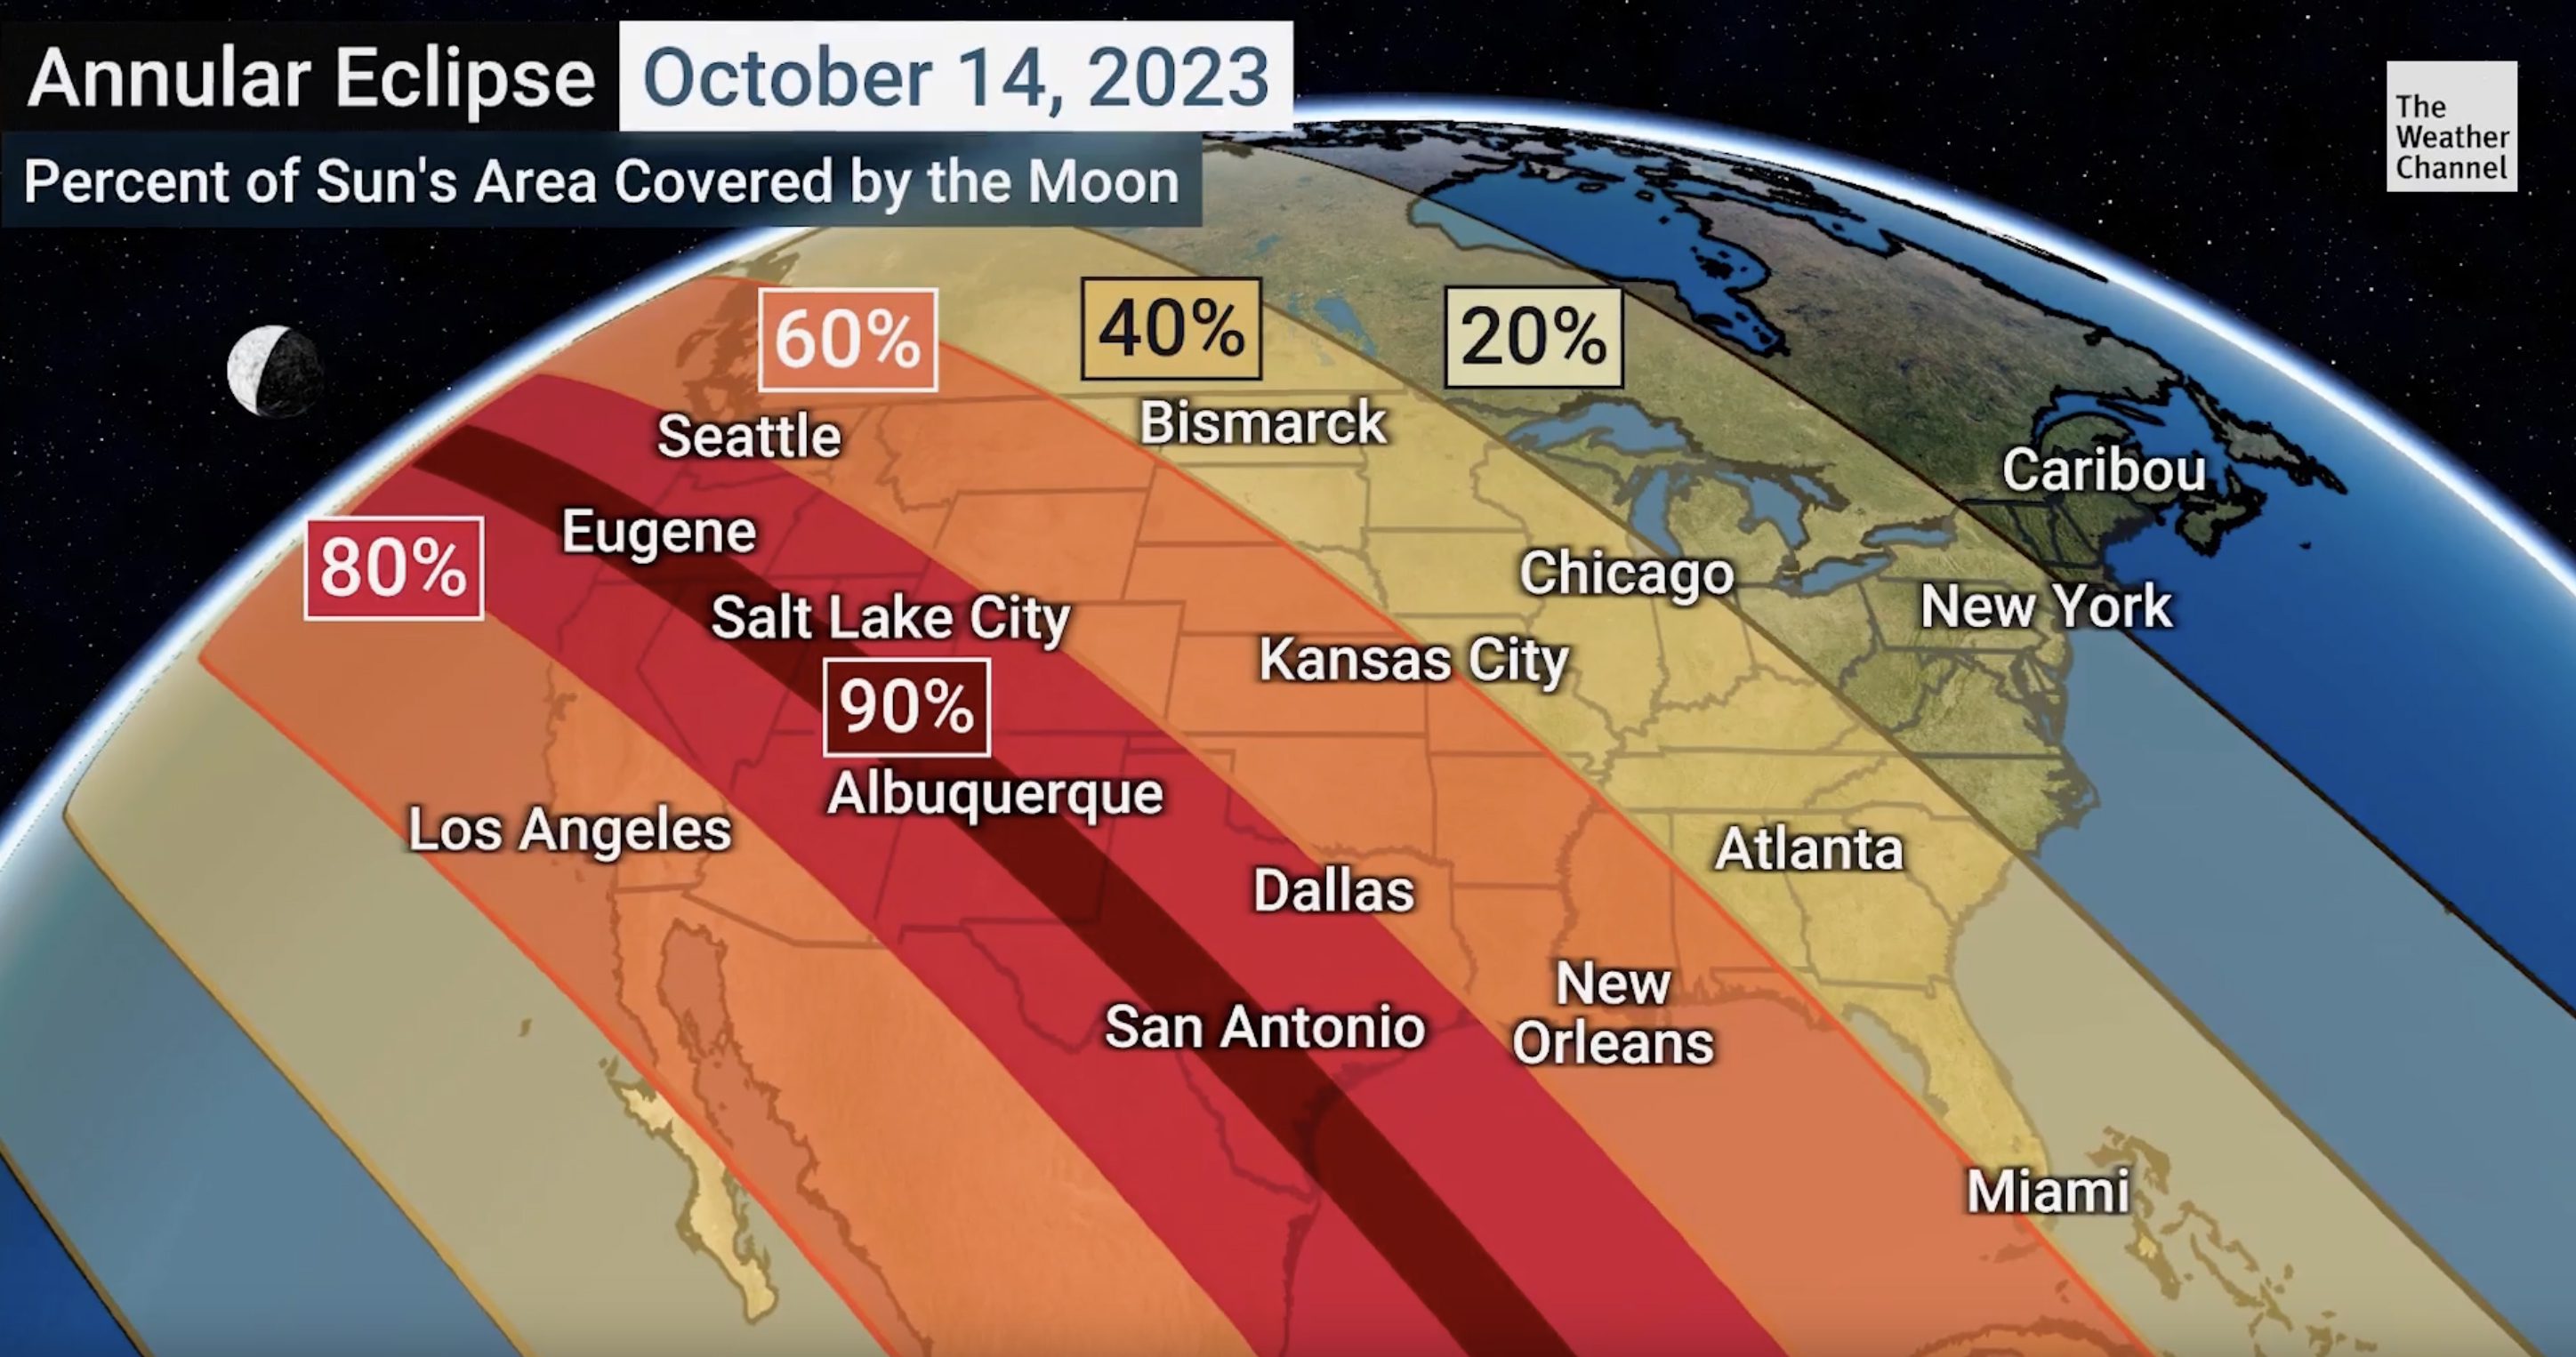 Visibility of Oct. 14, 2023 annular eclipse